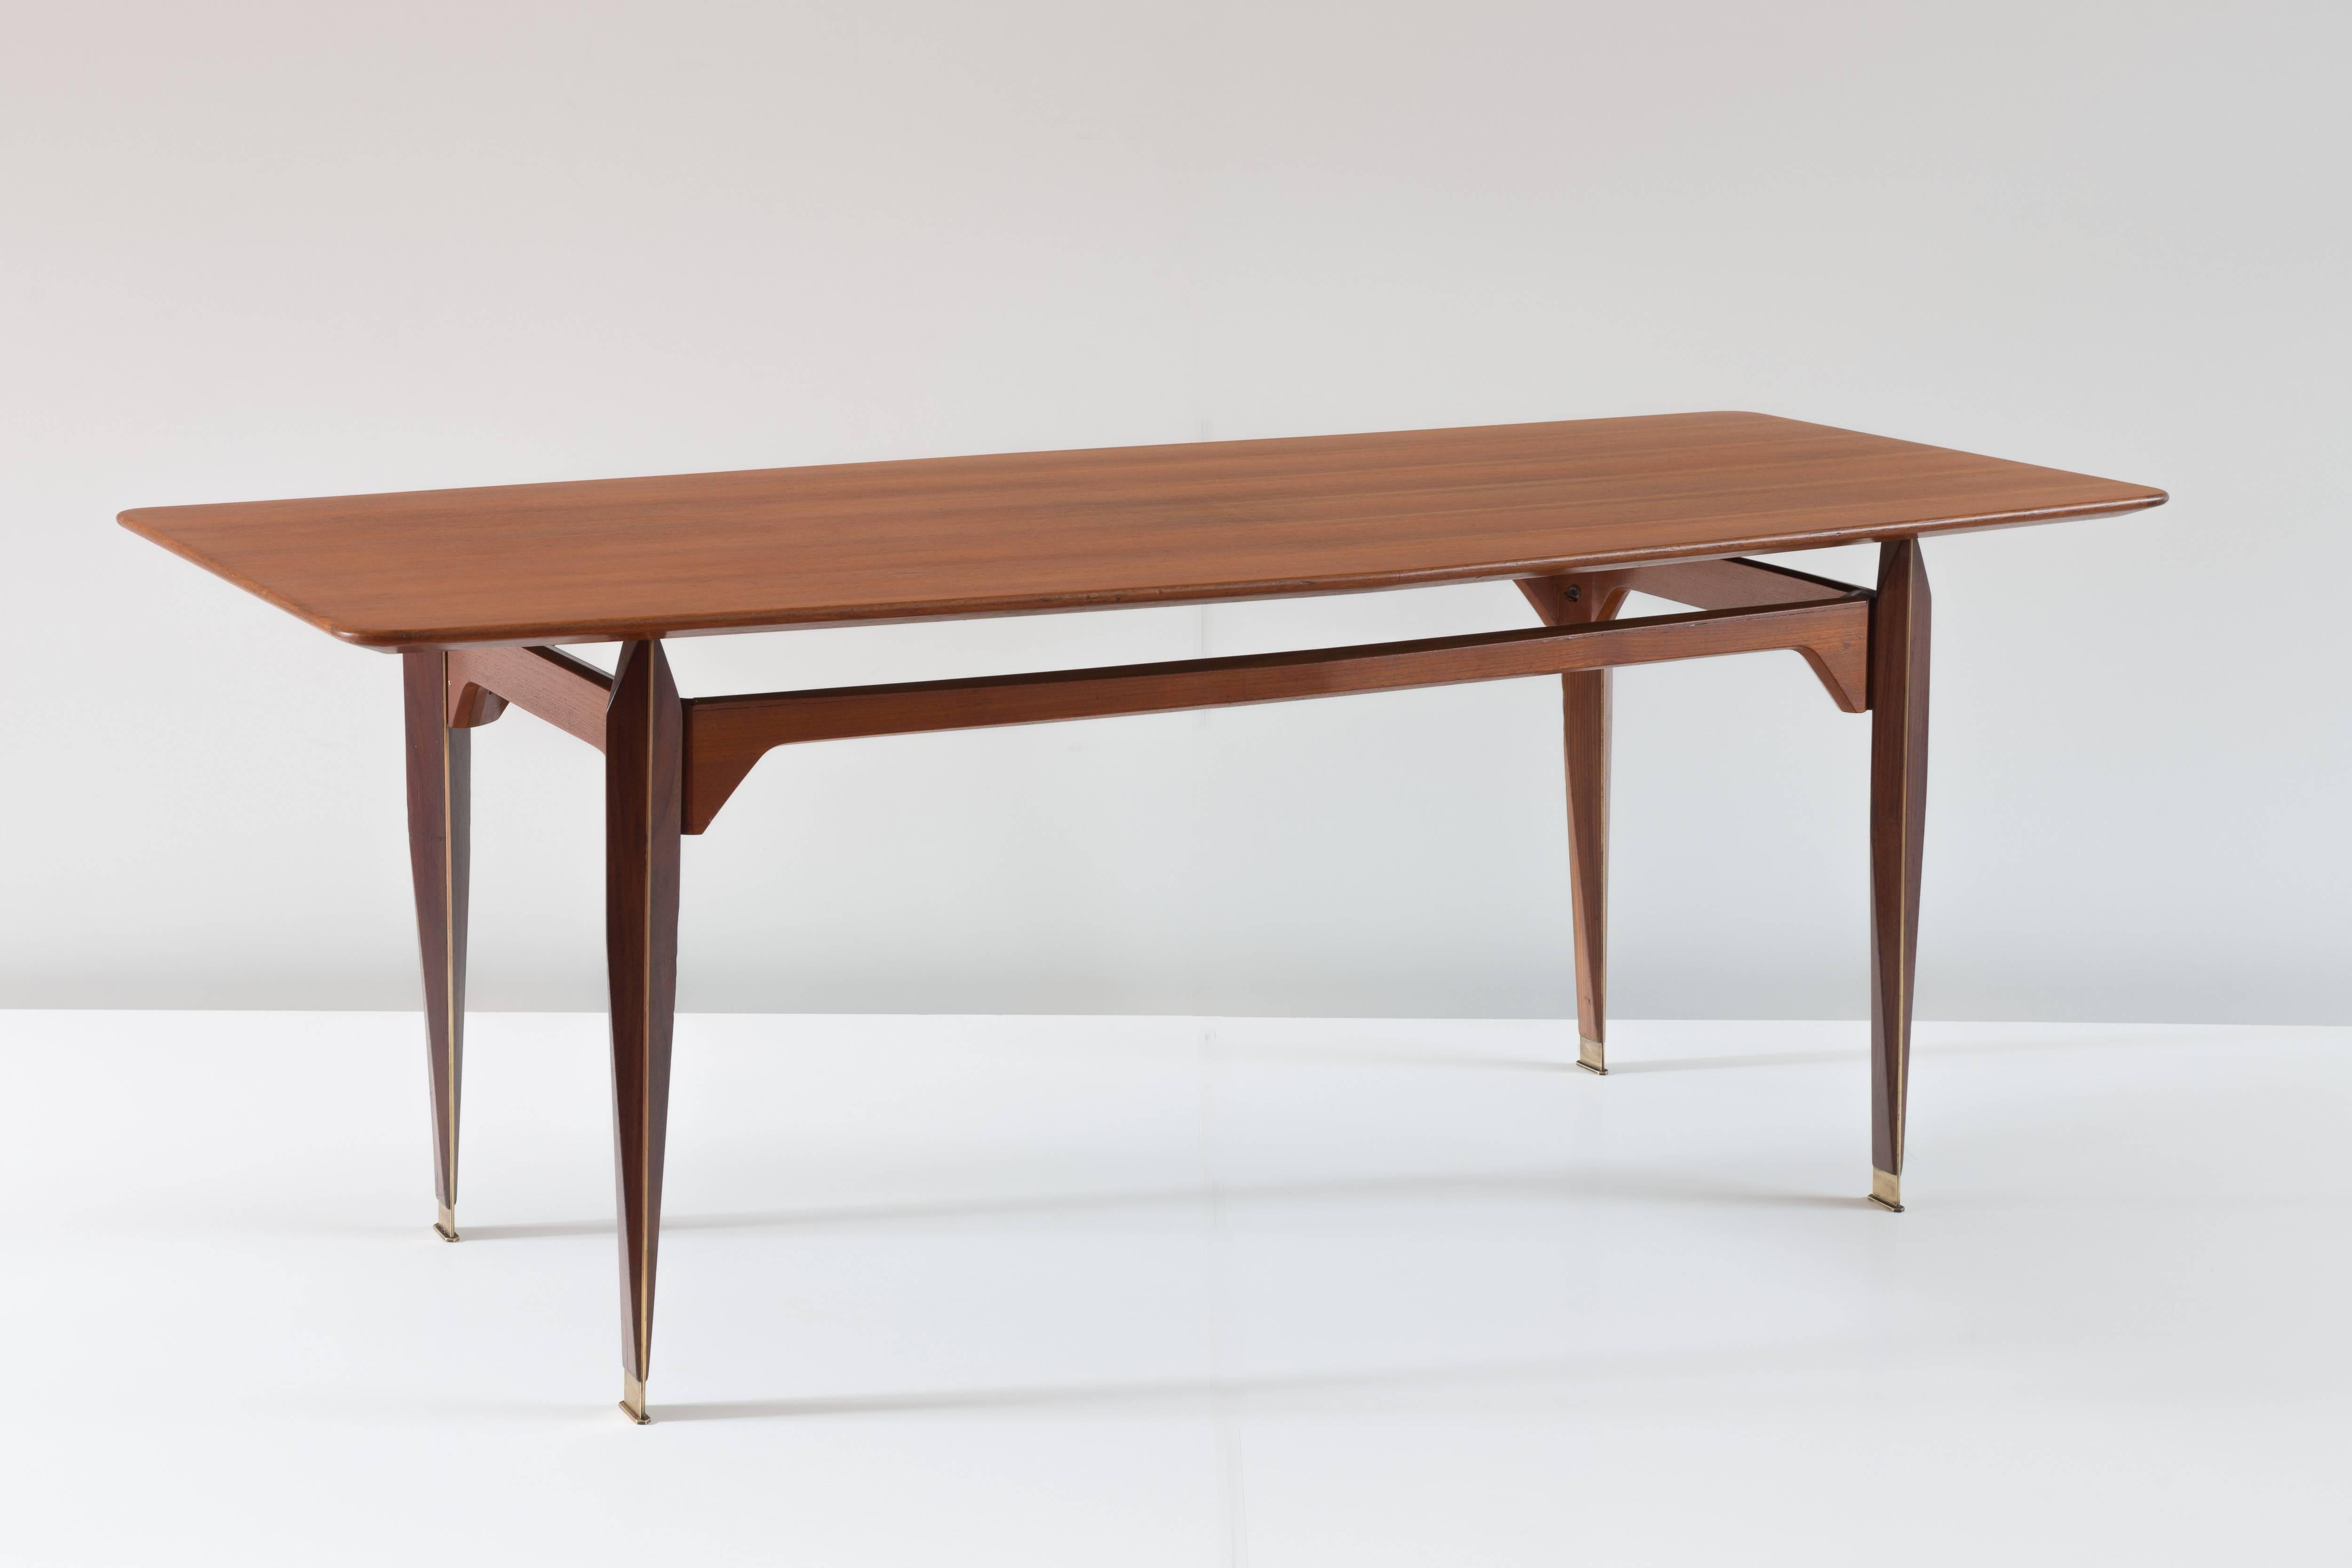 Italian Extremely Rare Dining Table Attributed to Franco Albini, 1953